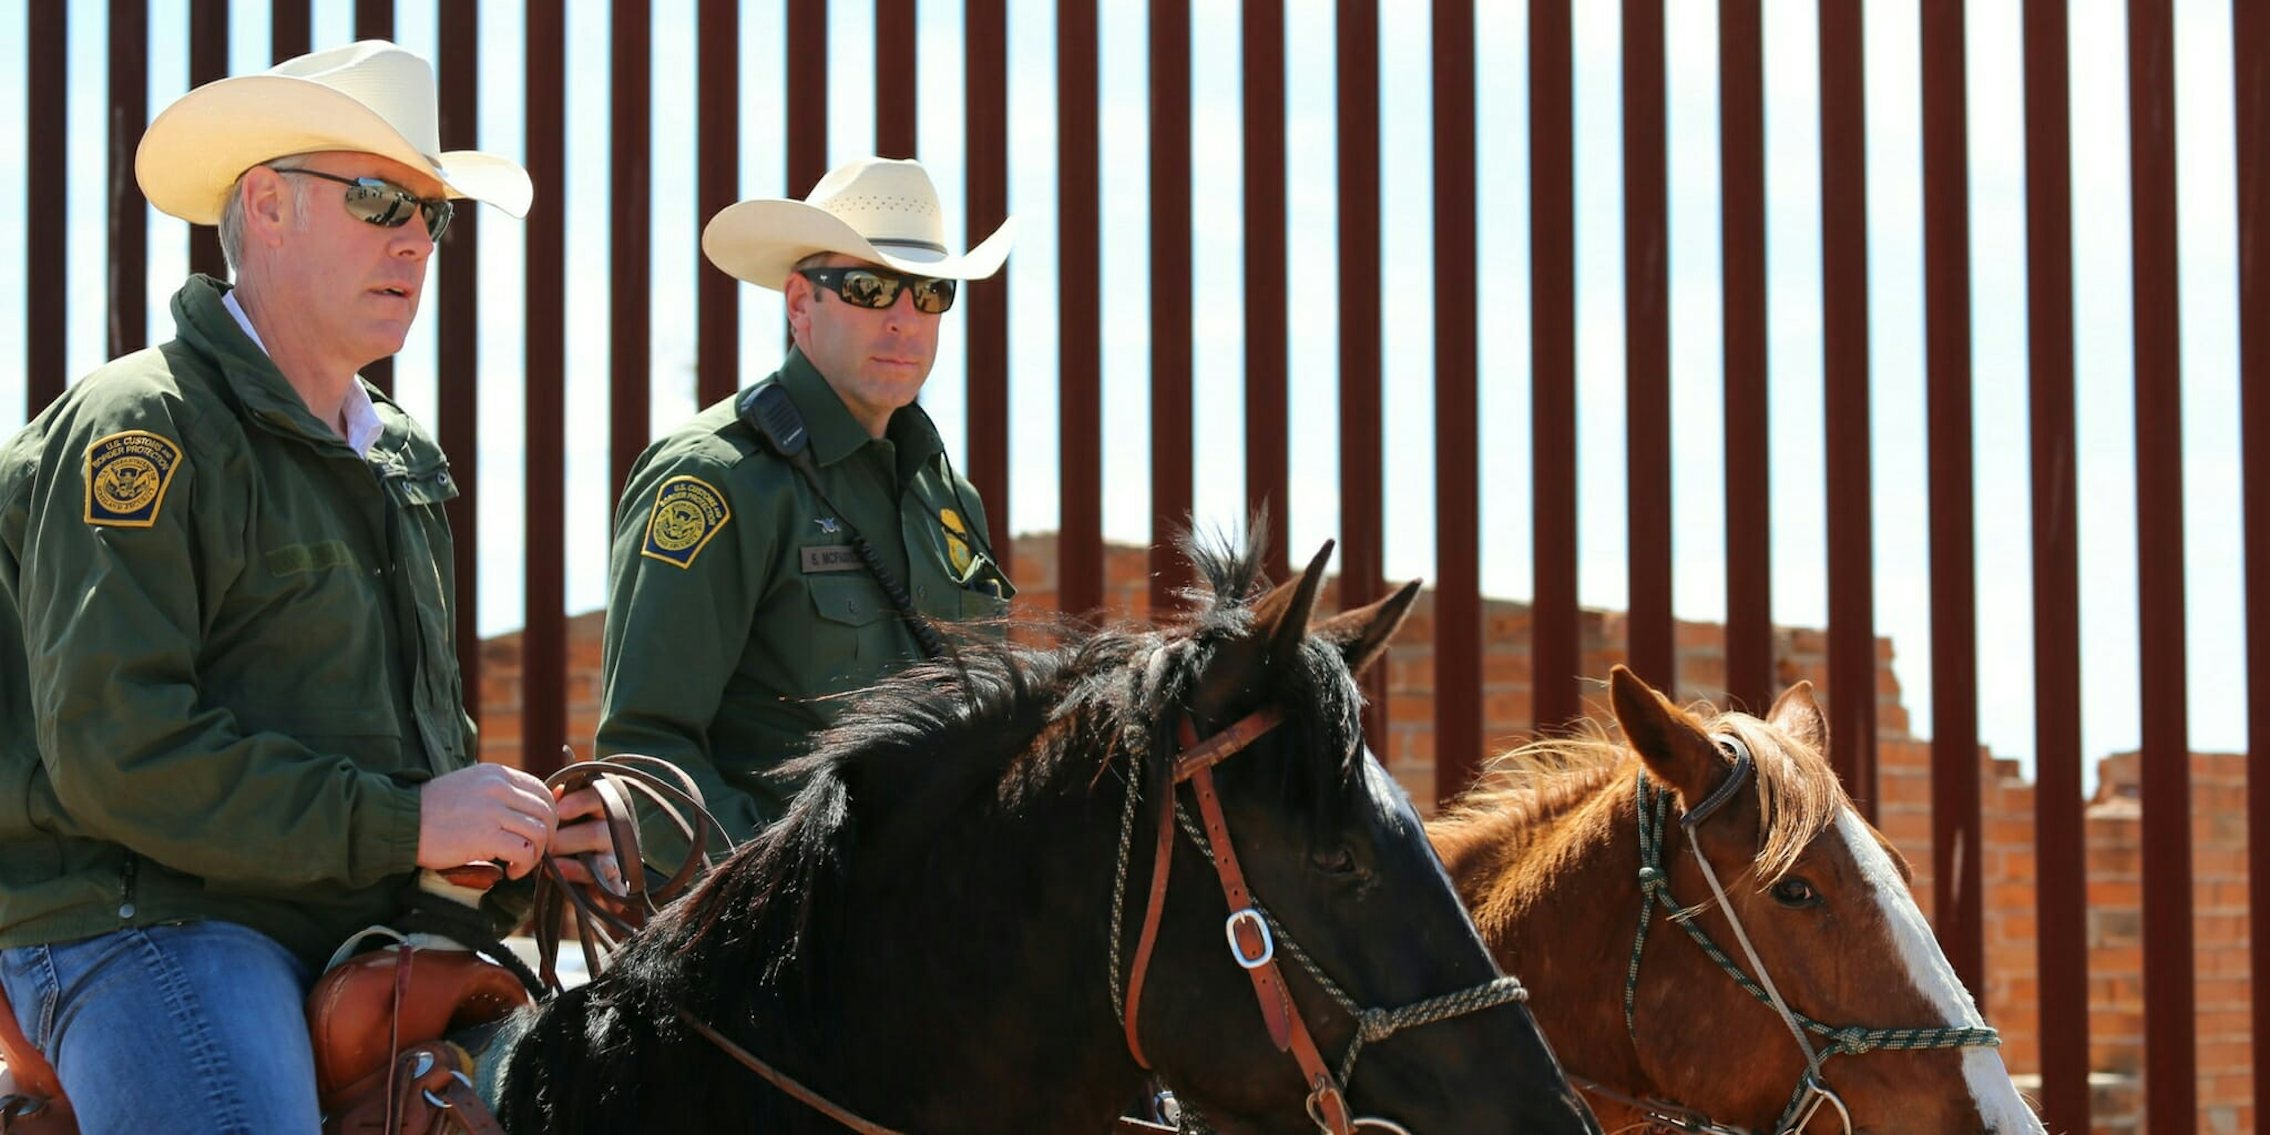 U.S. Department of Interior Secretary Ryan Zinke, left, and an official with the U.S. Border Patrol taking a horseback ride along the U.S.- Mexico border in Arizona.